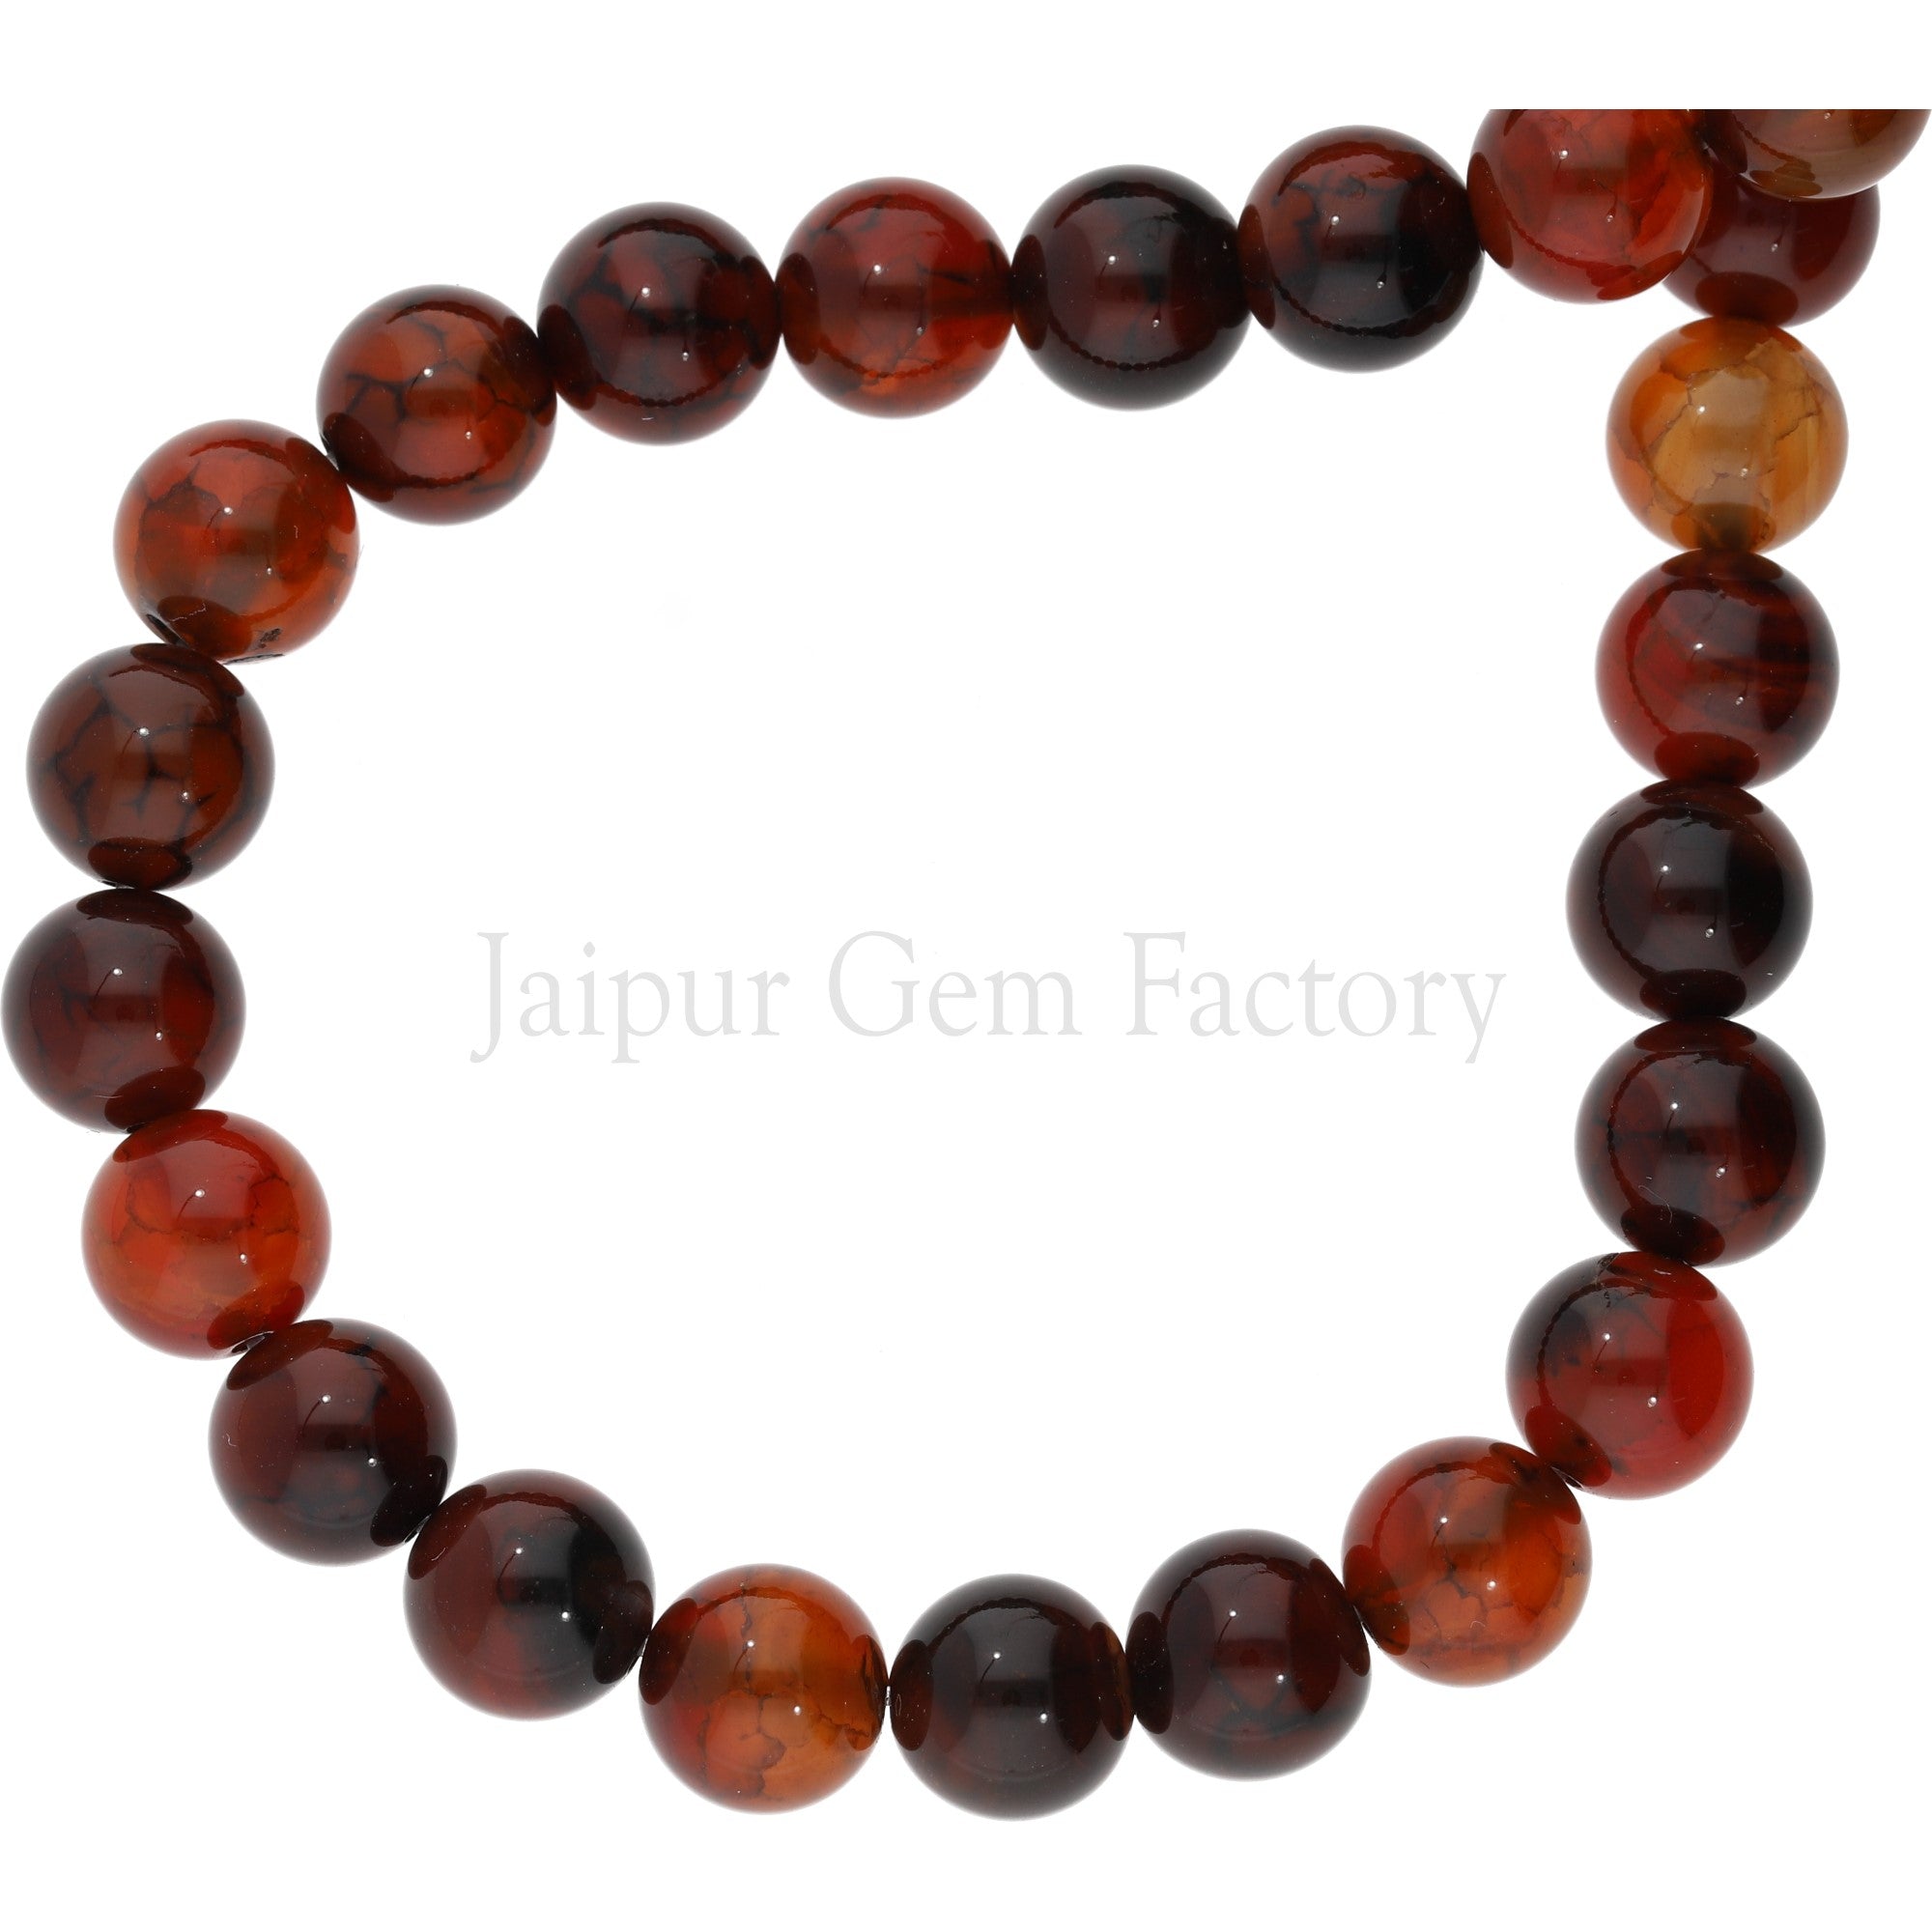 Cracked Agate 10 MM Smooth Round Shape Beads Strand